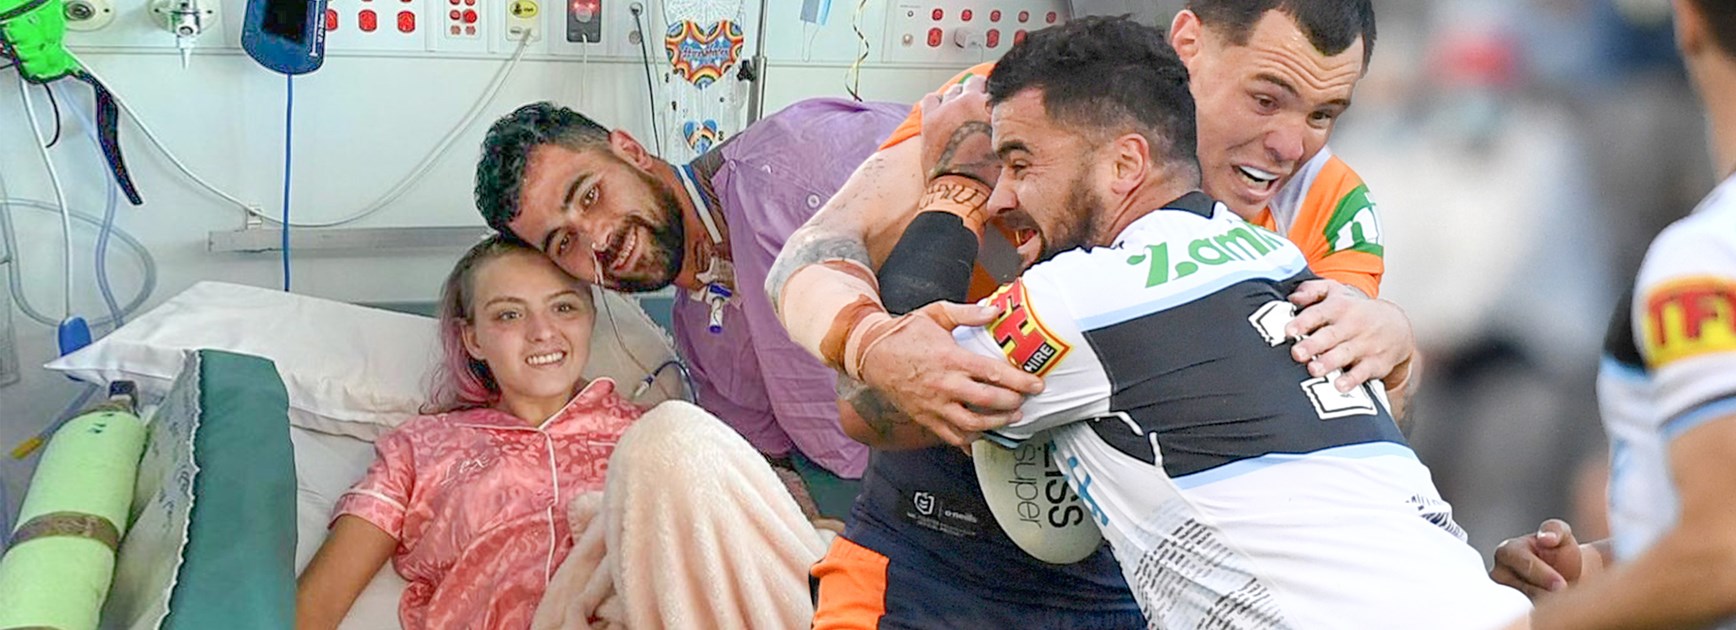 Out of ICU, 'grateful' Fifita inspired by injured triathlete for comeback bid